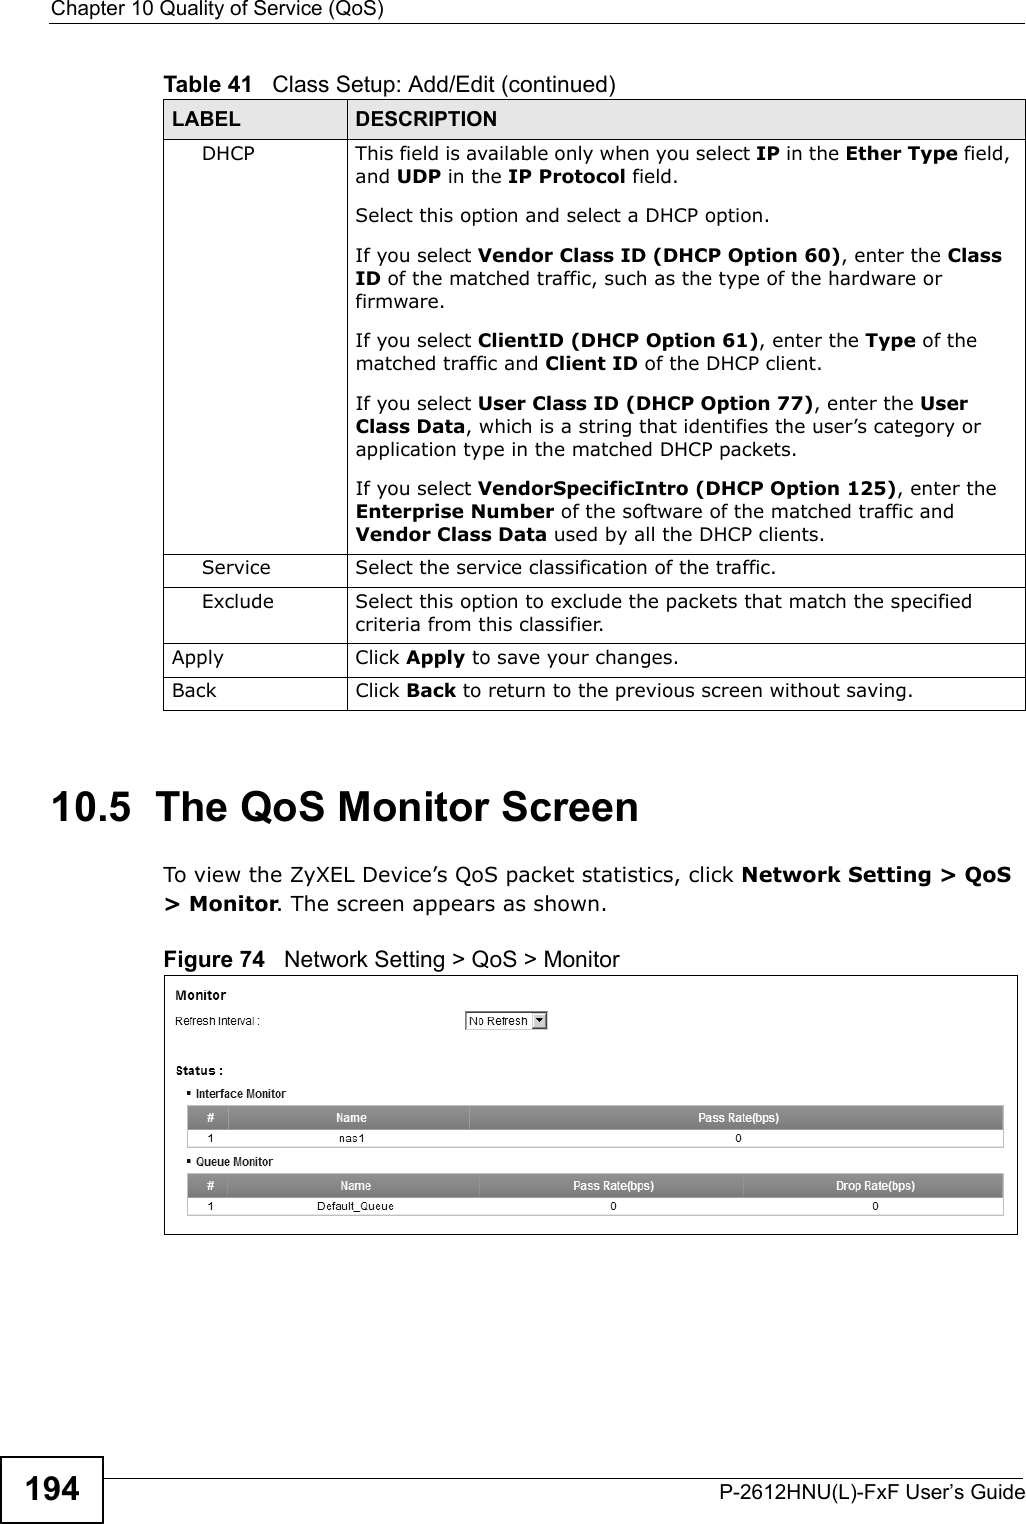 Chapter 10 Quality of Service (QoS)P-2612HNU(L)-FxF User’s Guide19410.5  The QoS Monitor Screen To view the ZyXEL Device’s QoS packet statistics, click Network Setting &gt; QoS &gt; Monitor. The screen appears as shown. Figure 74   Network Setting &gt; QoS &gt; MonitorDHCP This field is available only when you select IP in the Ether Type field,and UDP in the IP Protocol field.Select this option and select a DHCP option. If you select Vendor Class ID (DHCP Option 60), enter the Class ID of the matched traffic, such as the type of the hardware or firmware.If you select ClientID (DHCP Option 61), enter the Type of the matched traffic and Client ID of the DHCP client.If you select User Class ID (DHCP Option 77), enter the UserClass Data, which is a string that identifies the user’s category or application type in the matched DHCP packets.If you select VendorSpecificIntro (DHCP Option 125), enter the Enterprise Number of the software of the matched traffic and Vendor Class Data used by all the DHCP clients.Service Select the service classification of the traffic.Exclude Select this option to exclude the packets that match the specified criteria from this classifier.Apply Click Apply to save your changes.Back Click Back to return to the previous screen without saving.Table 41   Class Setup: Add/Edit (continued)LABEL DESCRIPTION